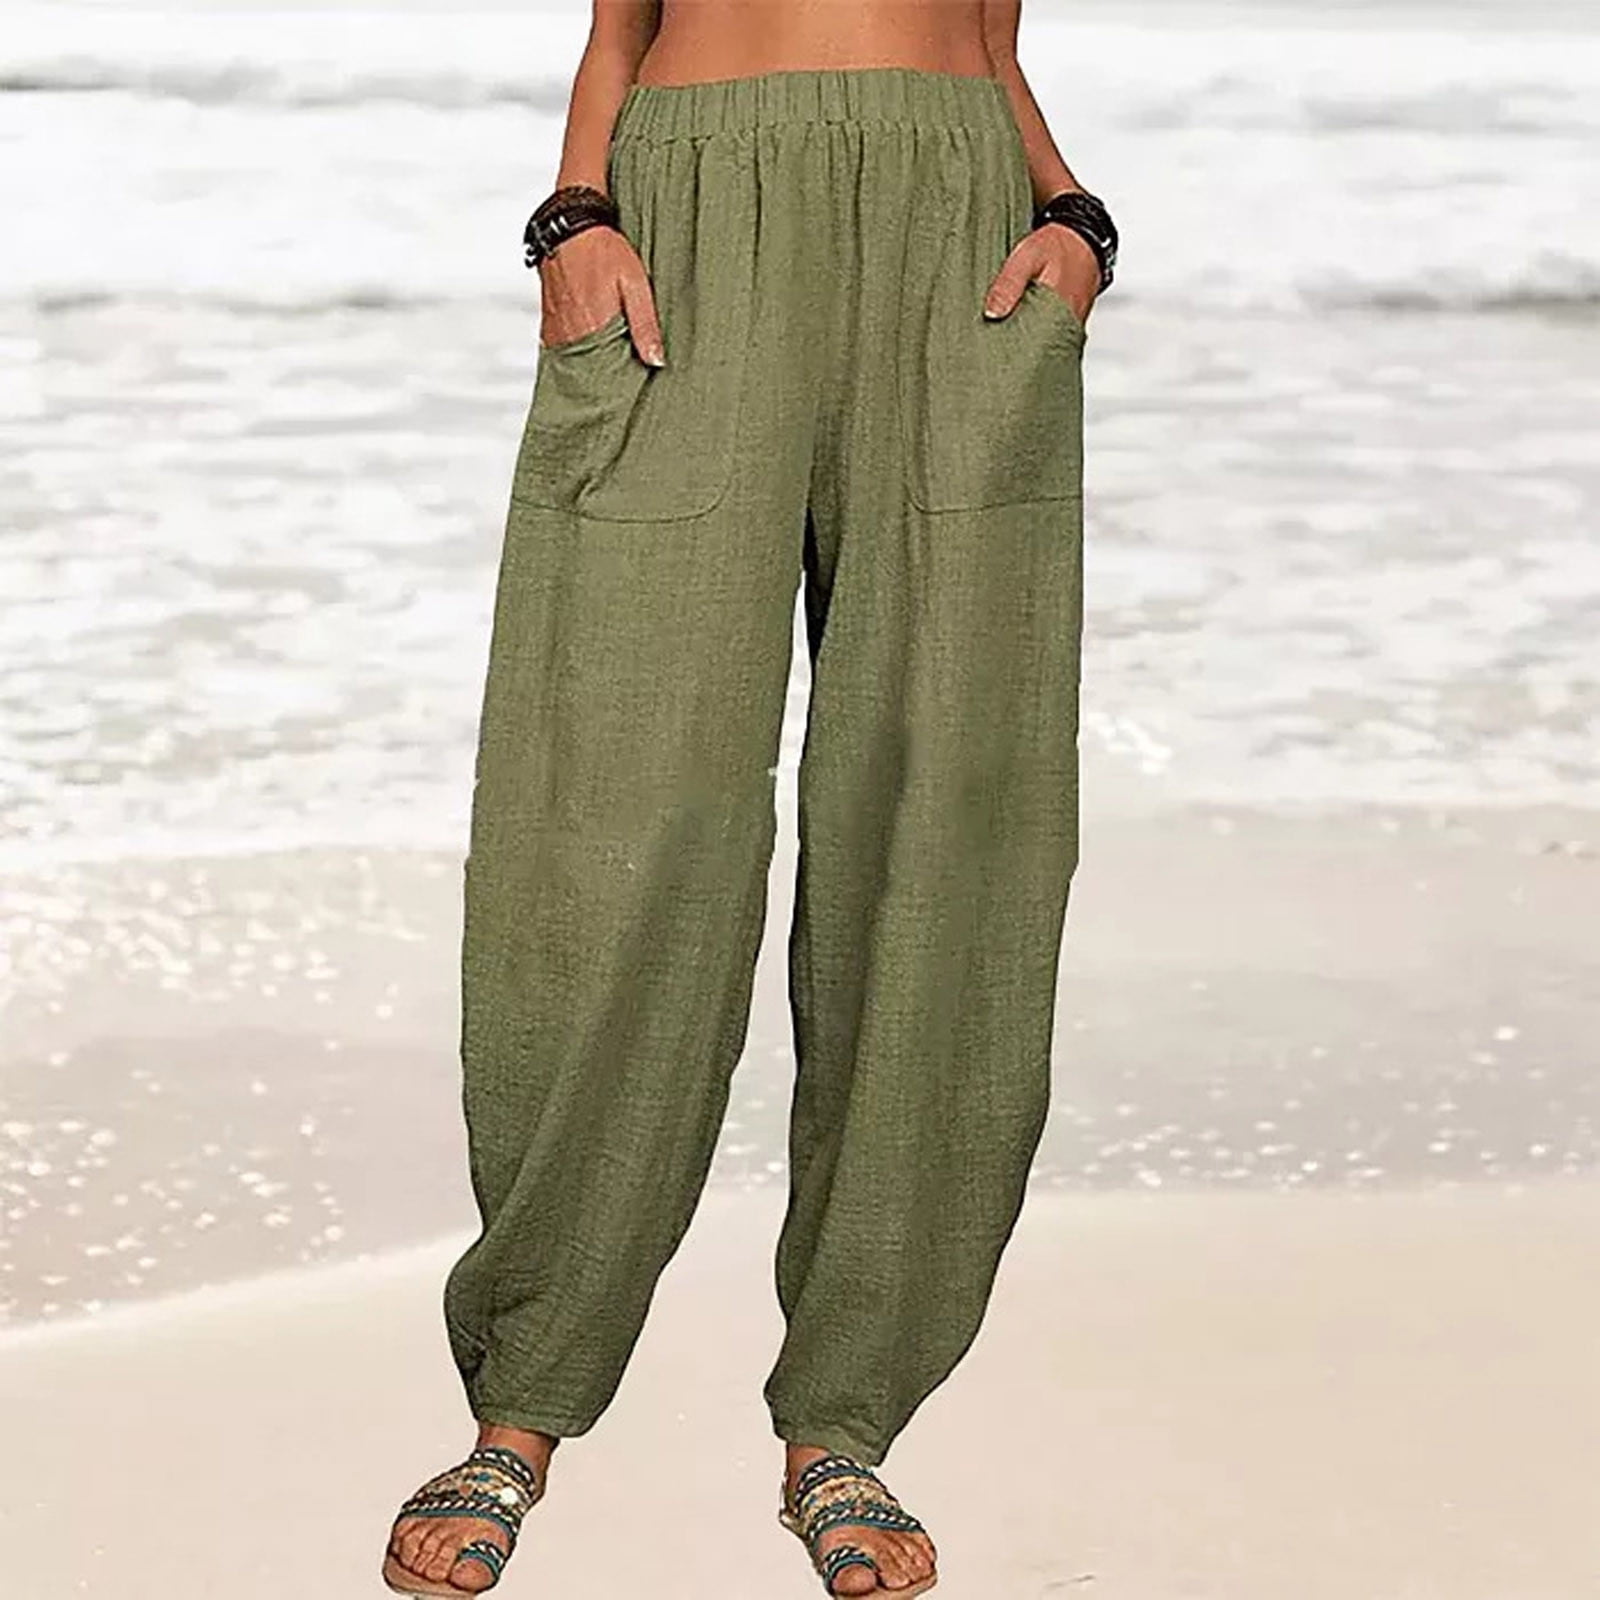 Boho Pants for Women Cotton Linen Baggy Summer Casual Loose Lounge Pants  Trousers Solid Color Slacks with Pockets (X-Large, Army Green)